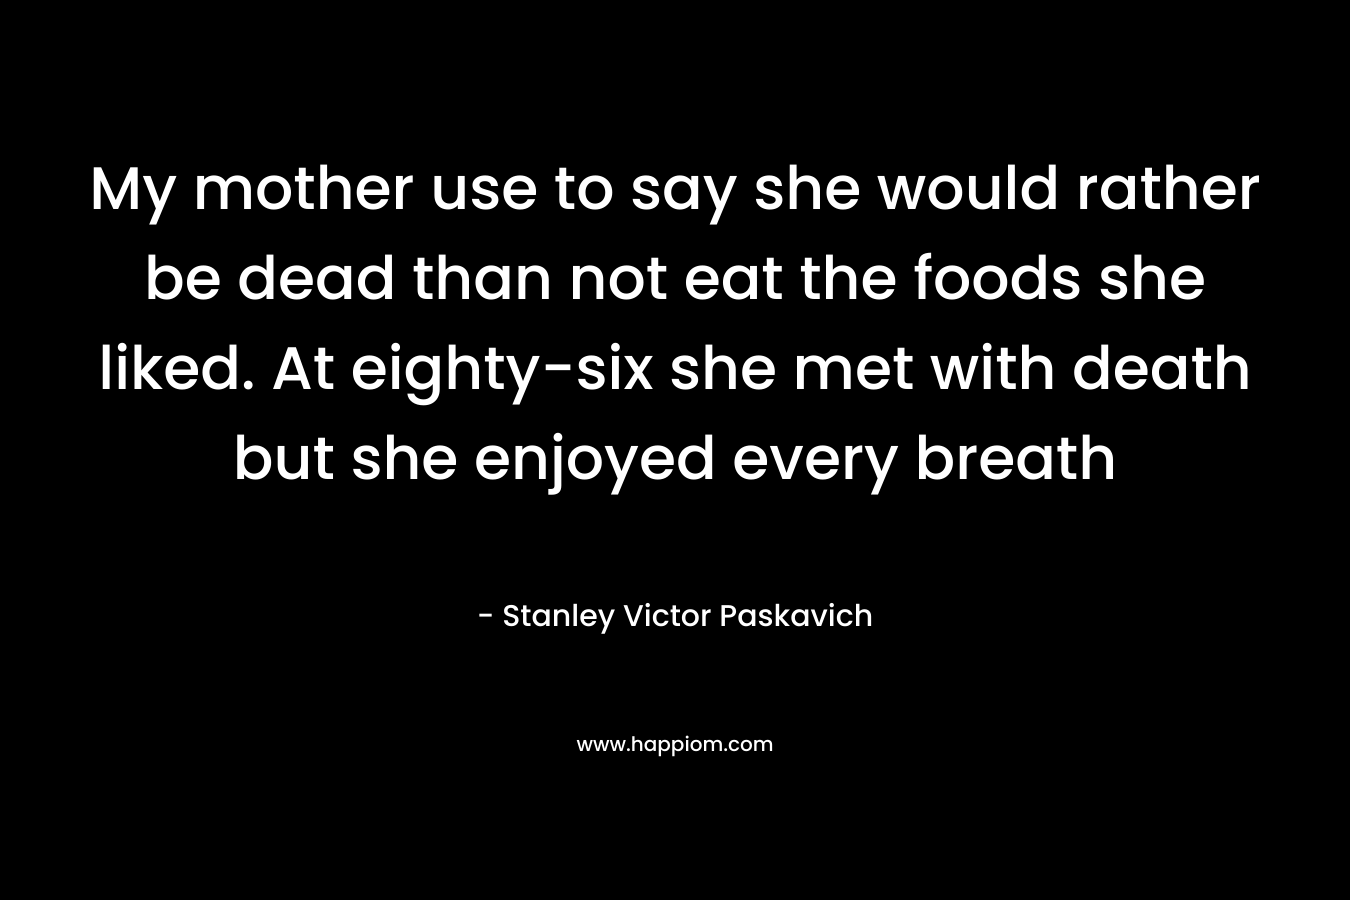 My mother use to say she would rather be dead than not eat the foods she liked. At eighty-six she met with death but she enjoyed every breath